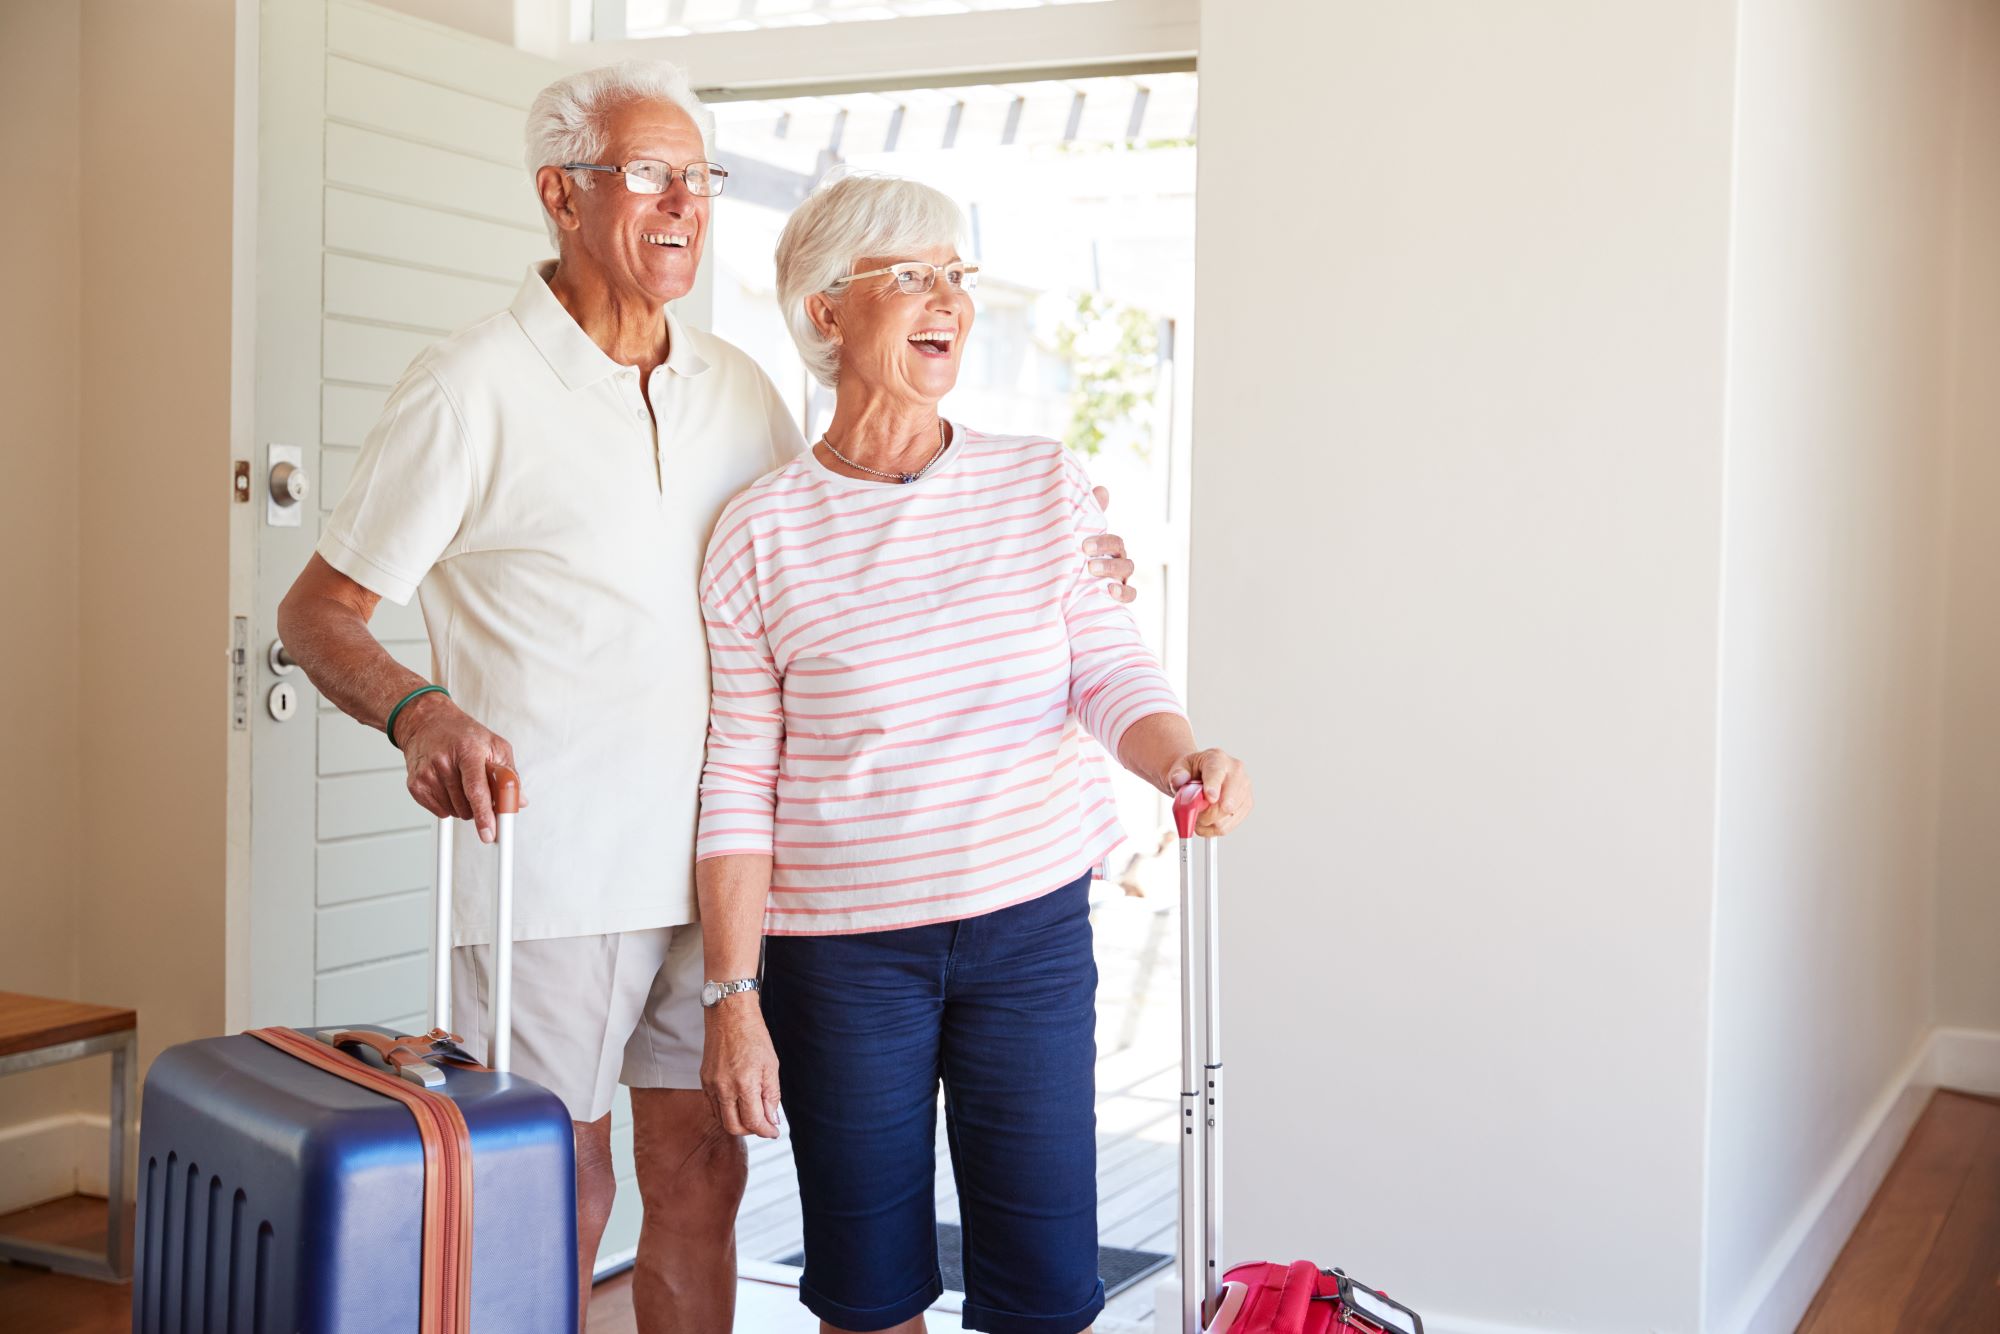 Specialized Moving Services That Help Seniors Downsize and Relocate